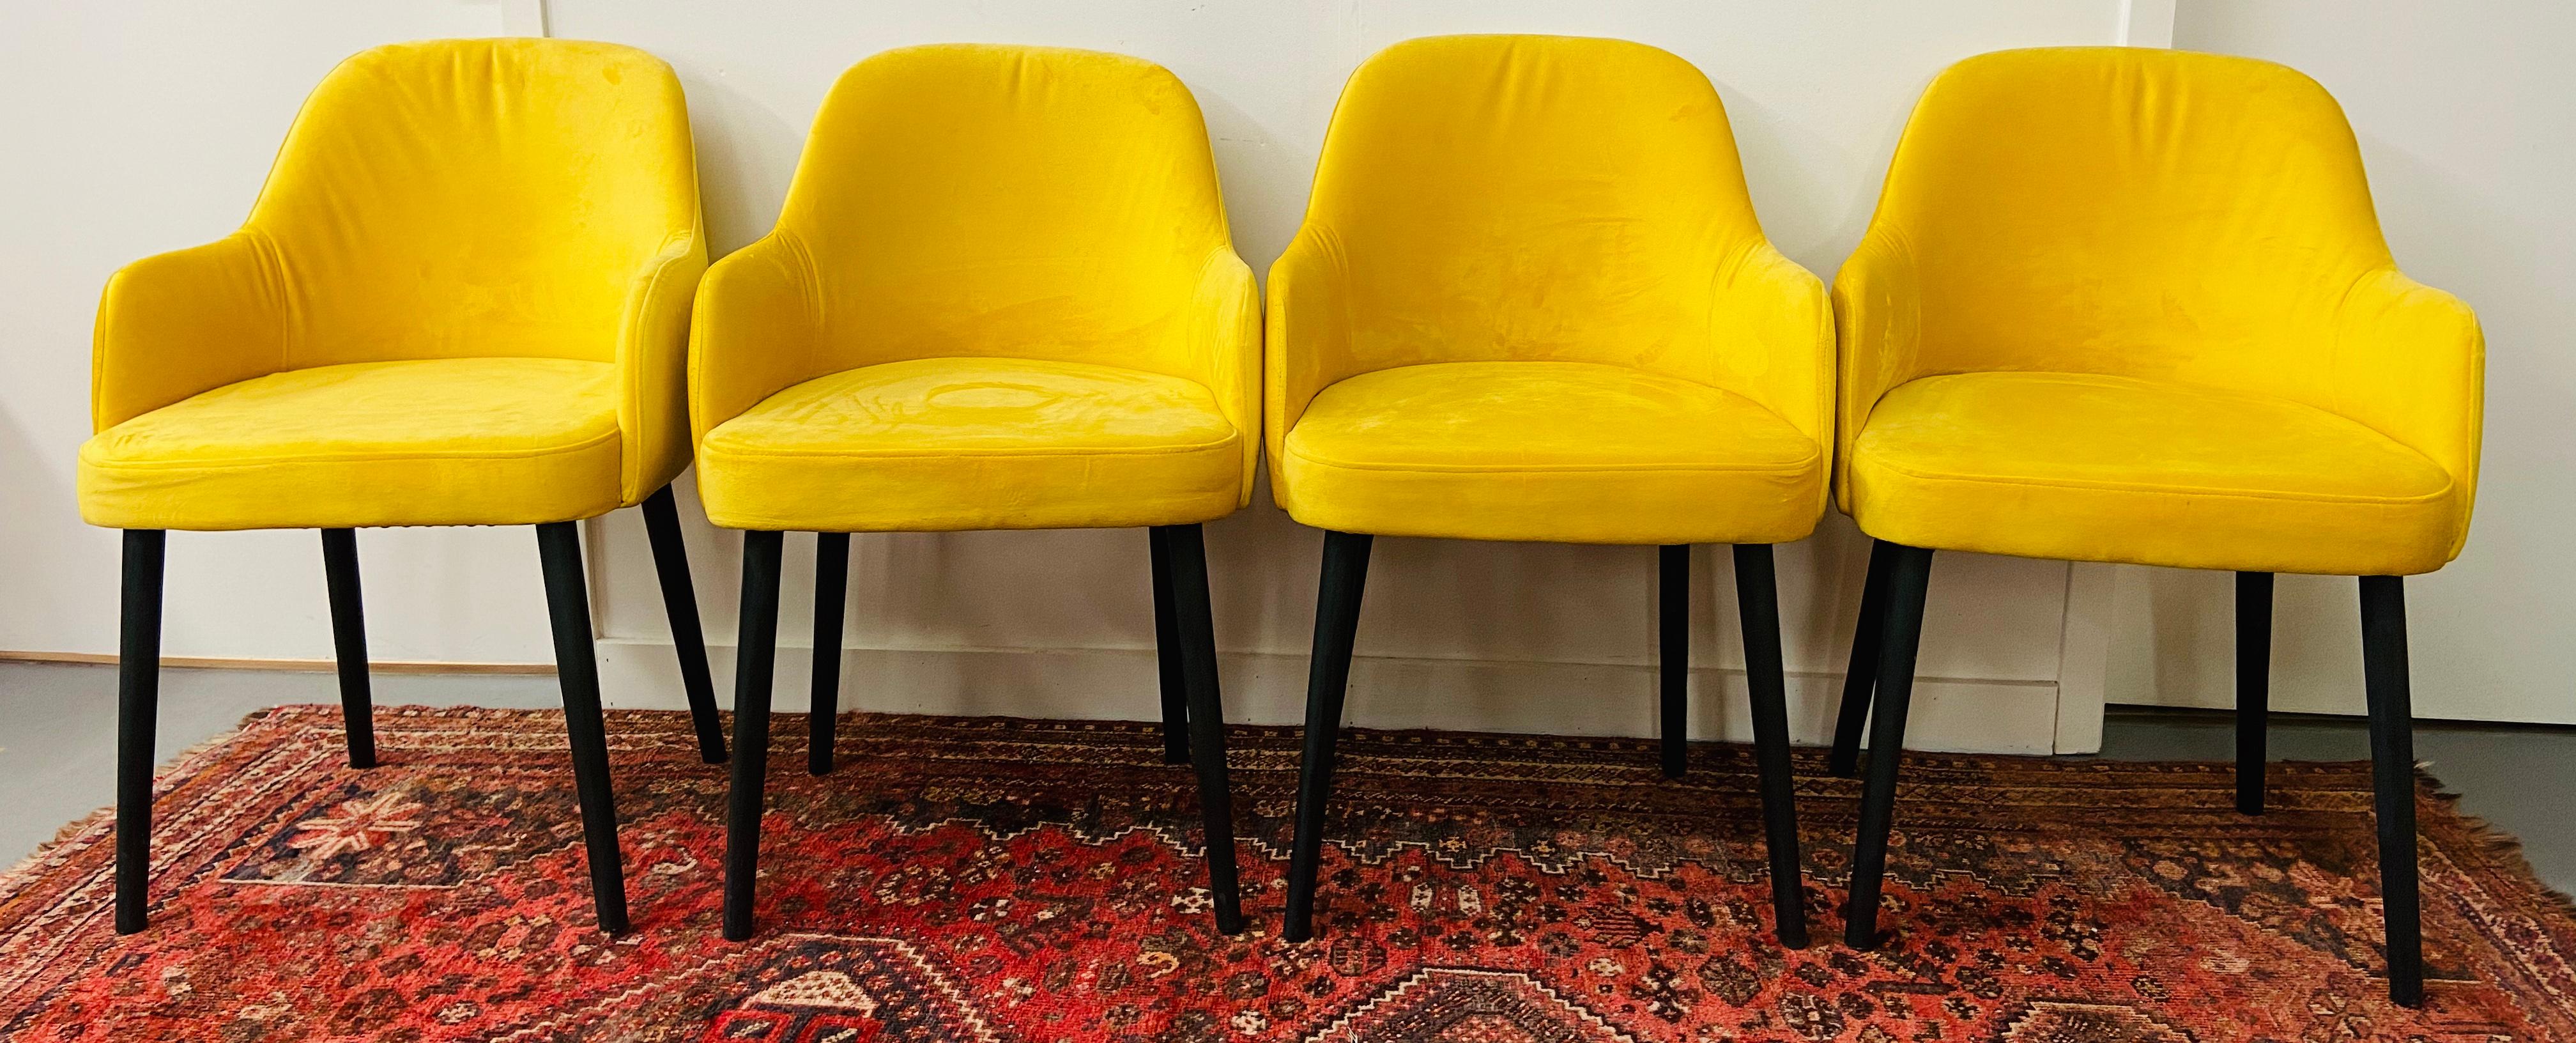 A very chic and comfortable set of 4 Mid-Century Modern barrel back armchairs. The chair is handmade and have a new suede upholstery. The cheerful mustard yellow color is a bold statement and very modern and stylish. The chairs are the perfect